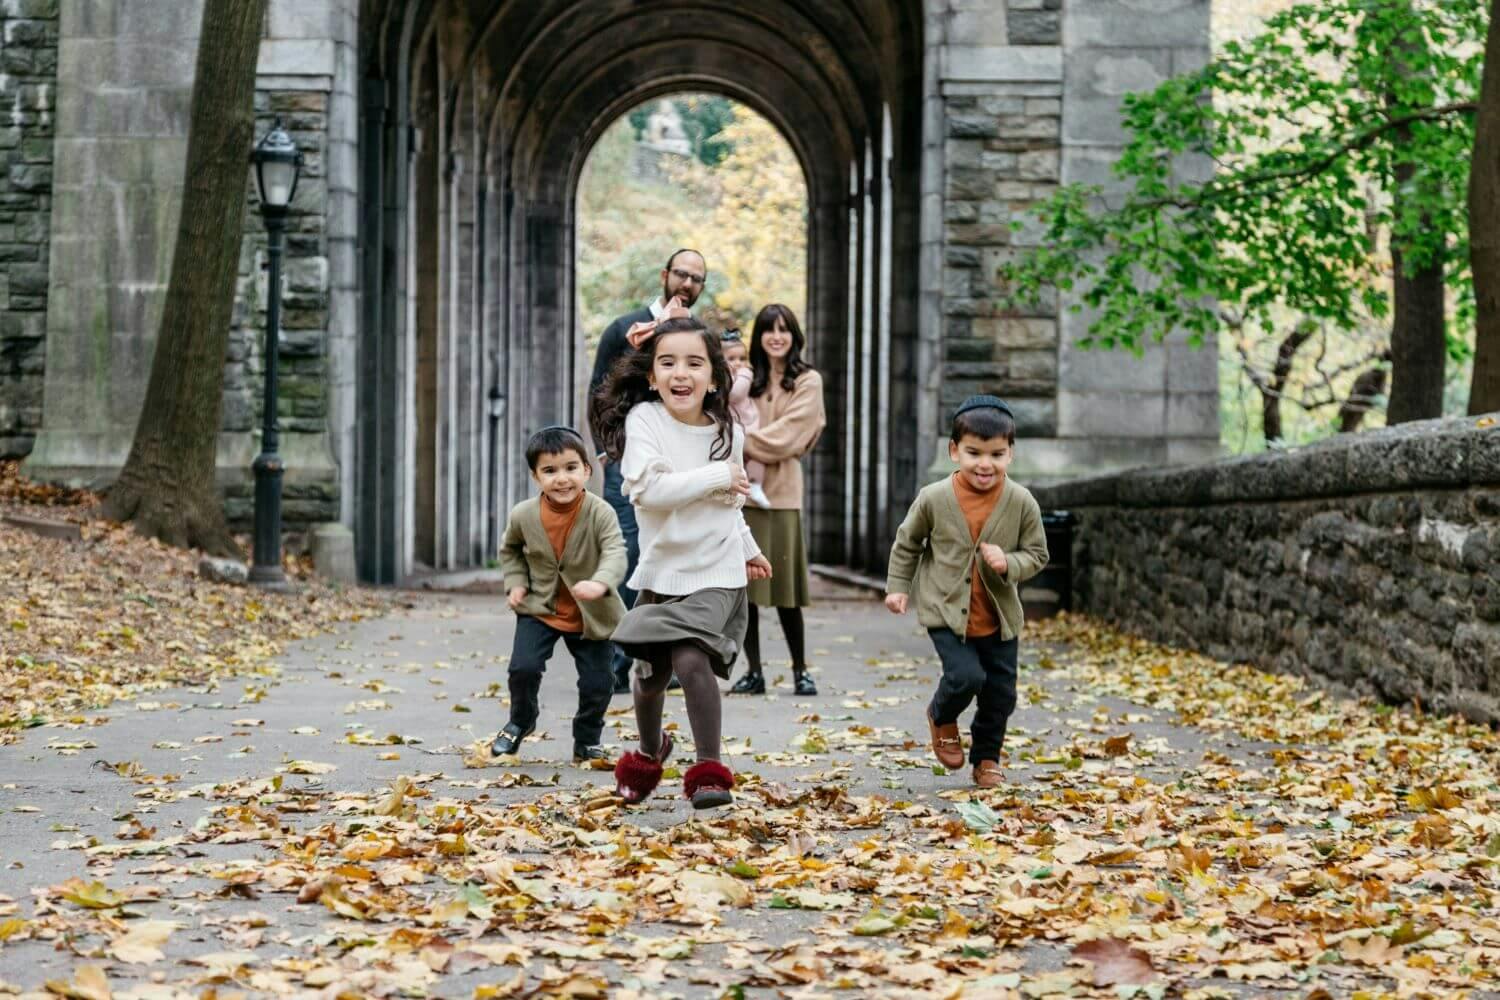 Two children happily running towards the camera with three adults following behind, in a scenic autumn archway.